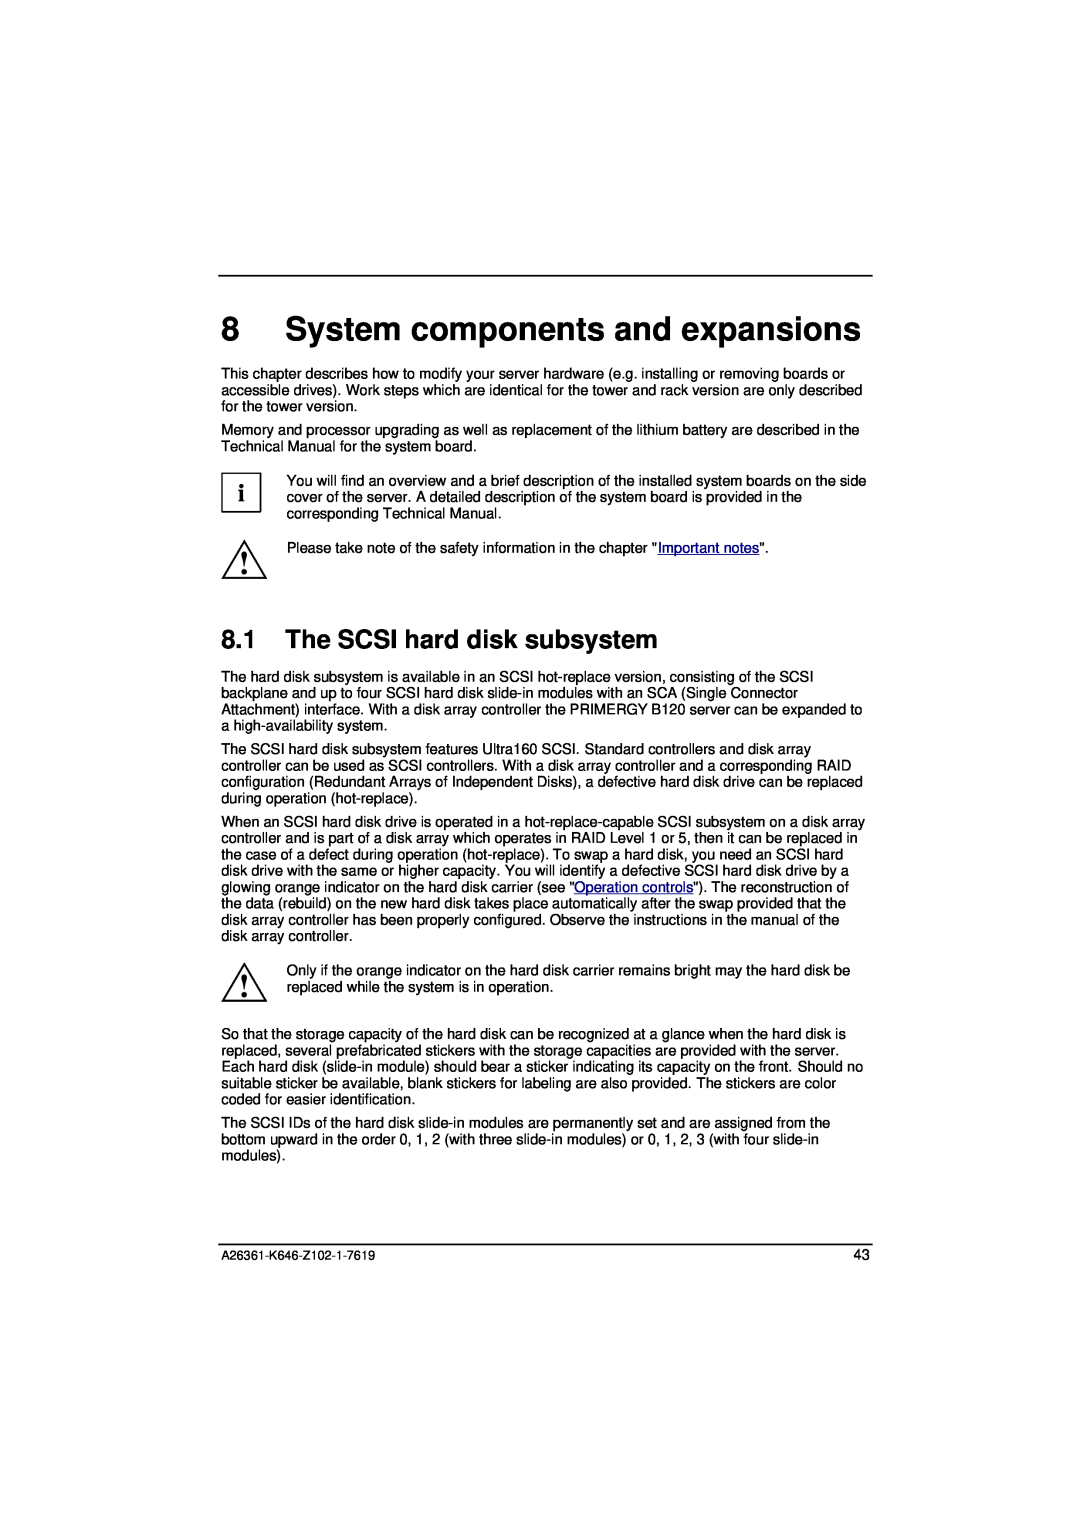 Fujitsu B120 manual System components and expansions, The SCSI hard disk subsystem 